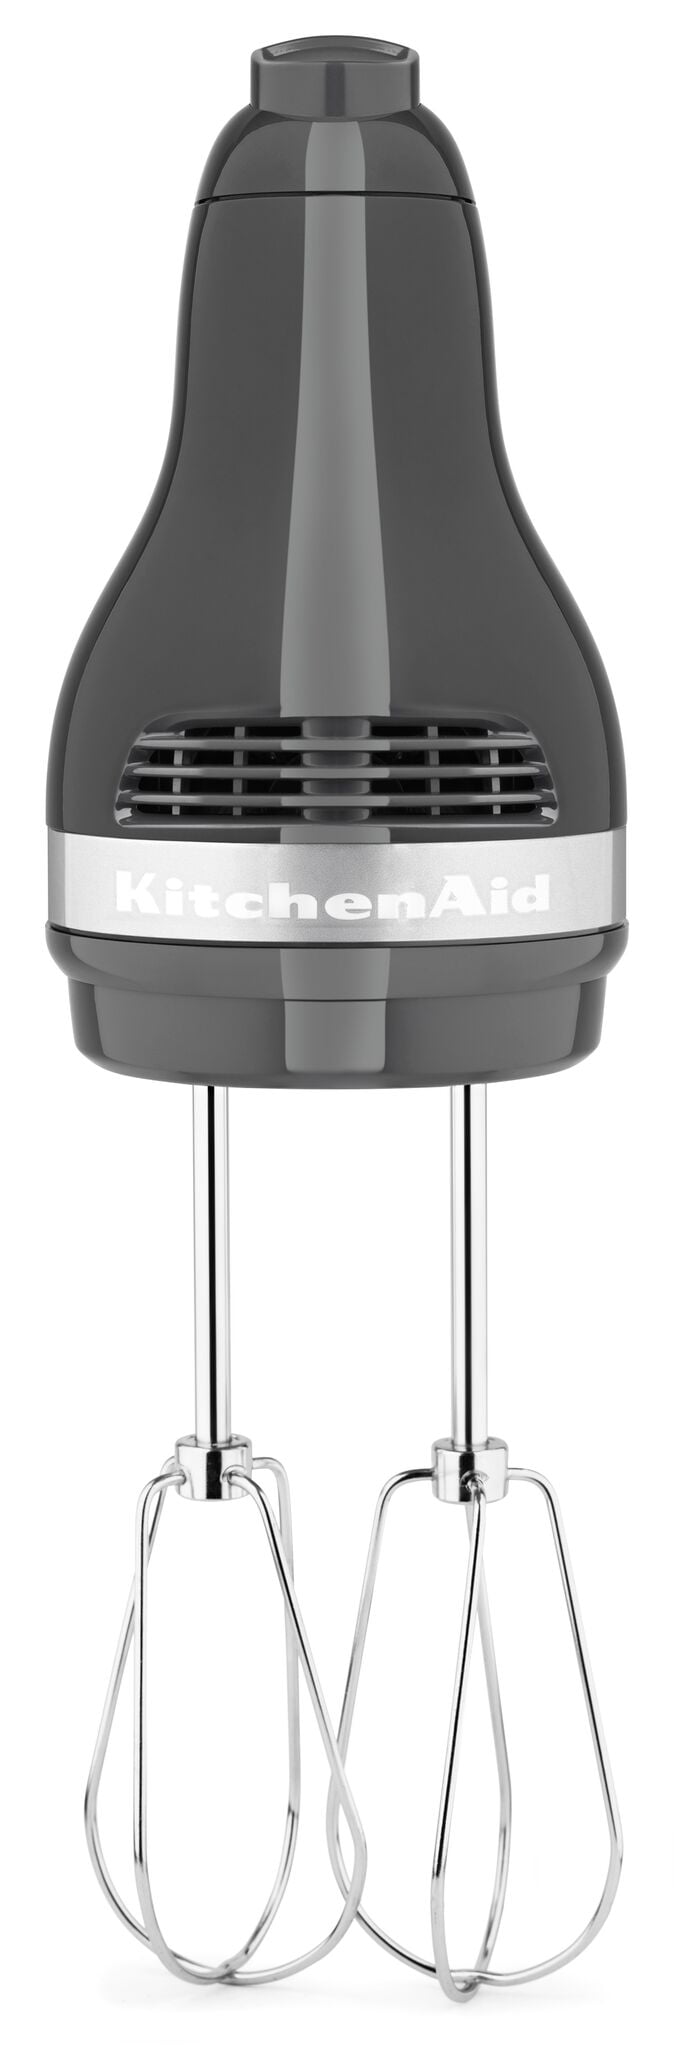 KitchenAid KHM512OB Ultra Power Onyx Black 5 Speed Hand Mixer with  Stainless Steel Turbo Beaters - 120V